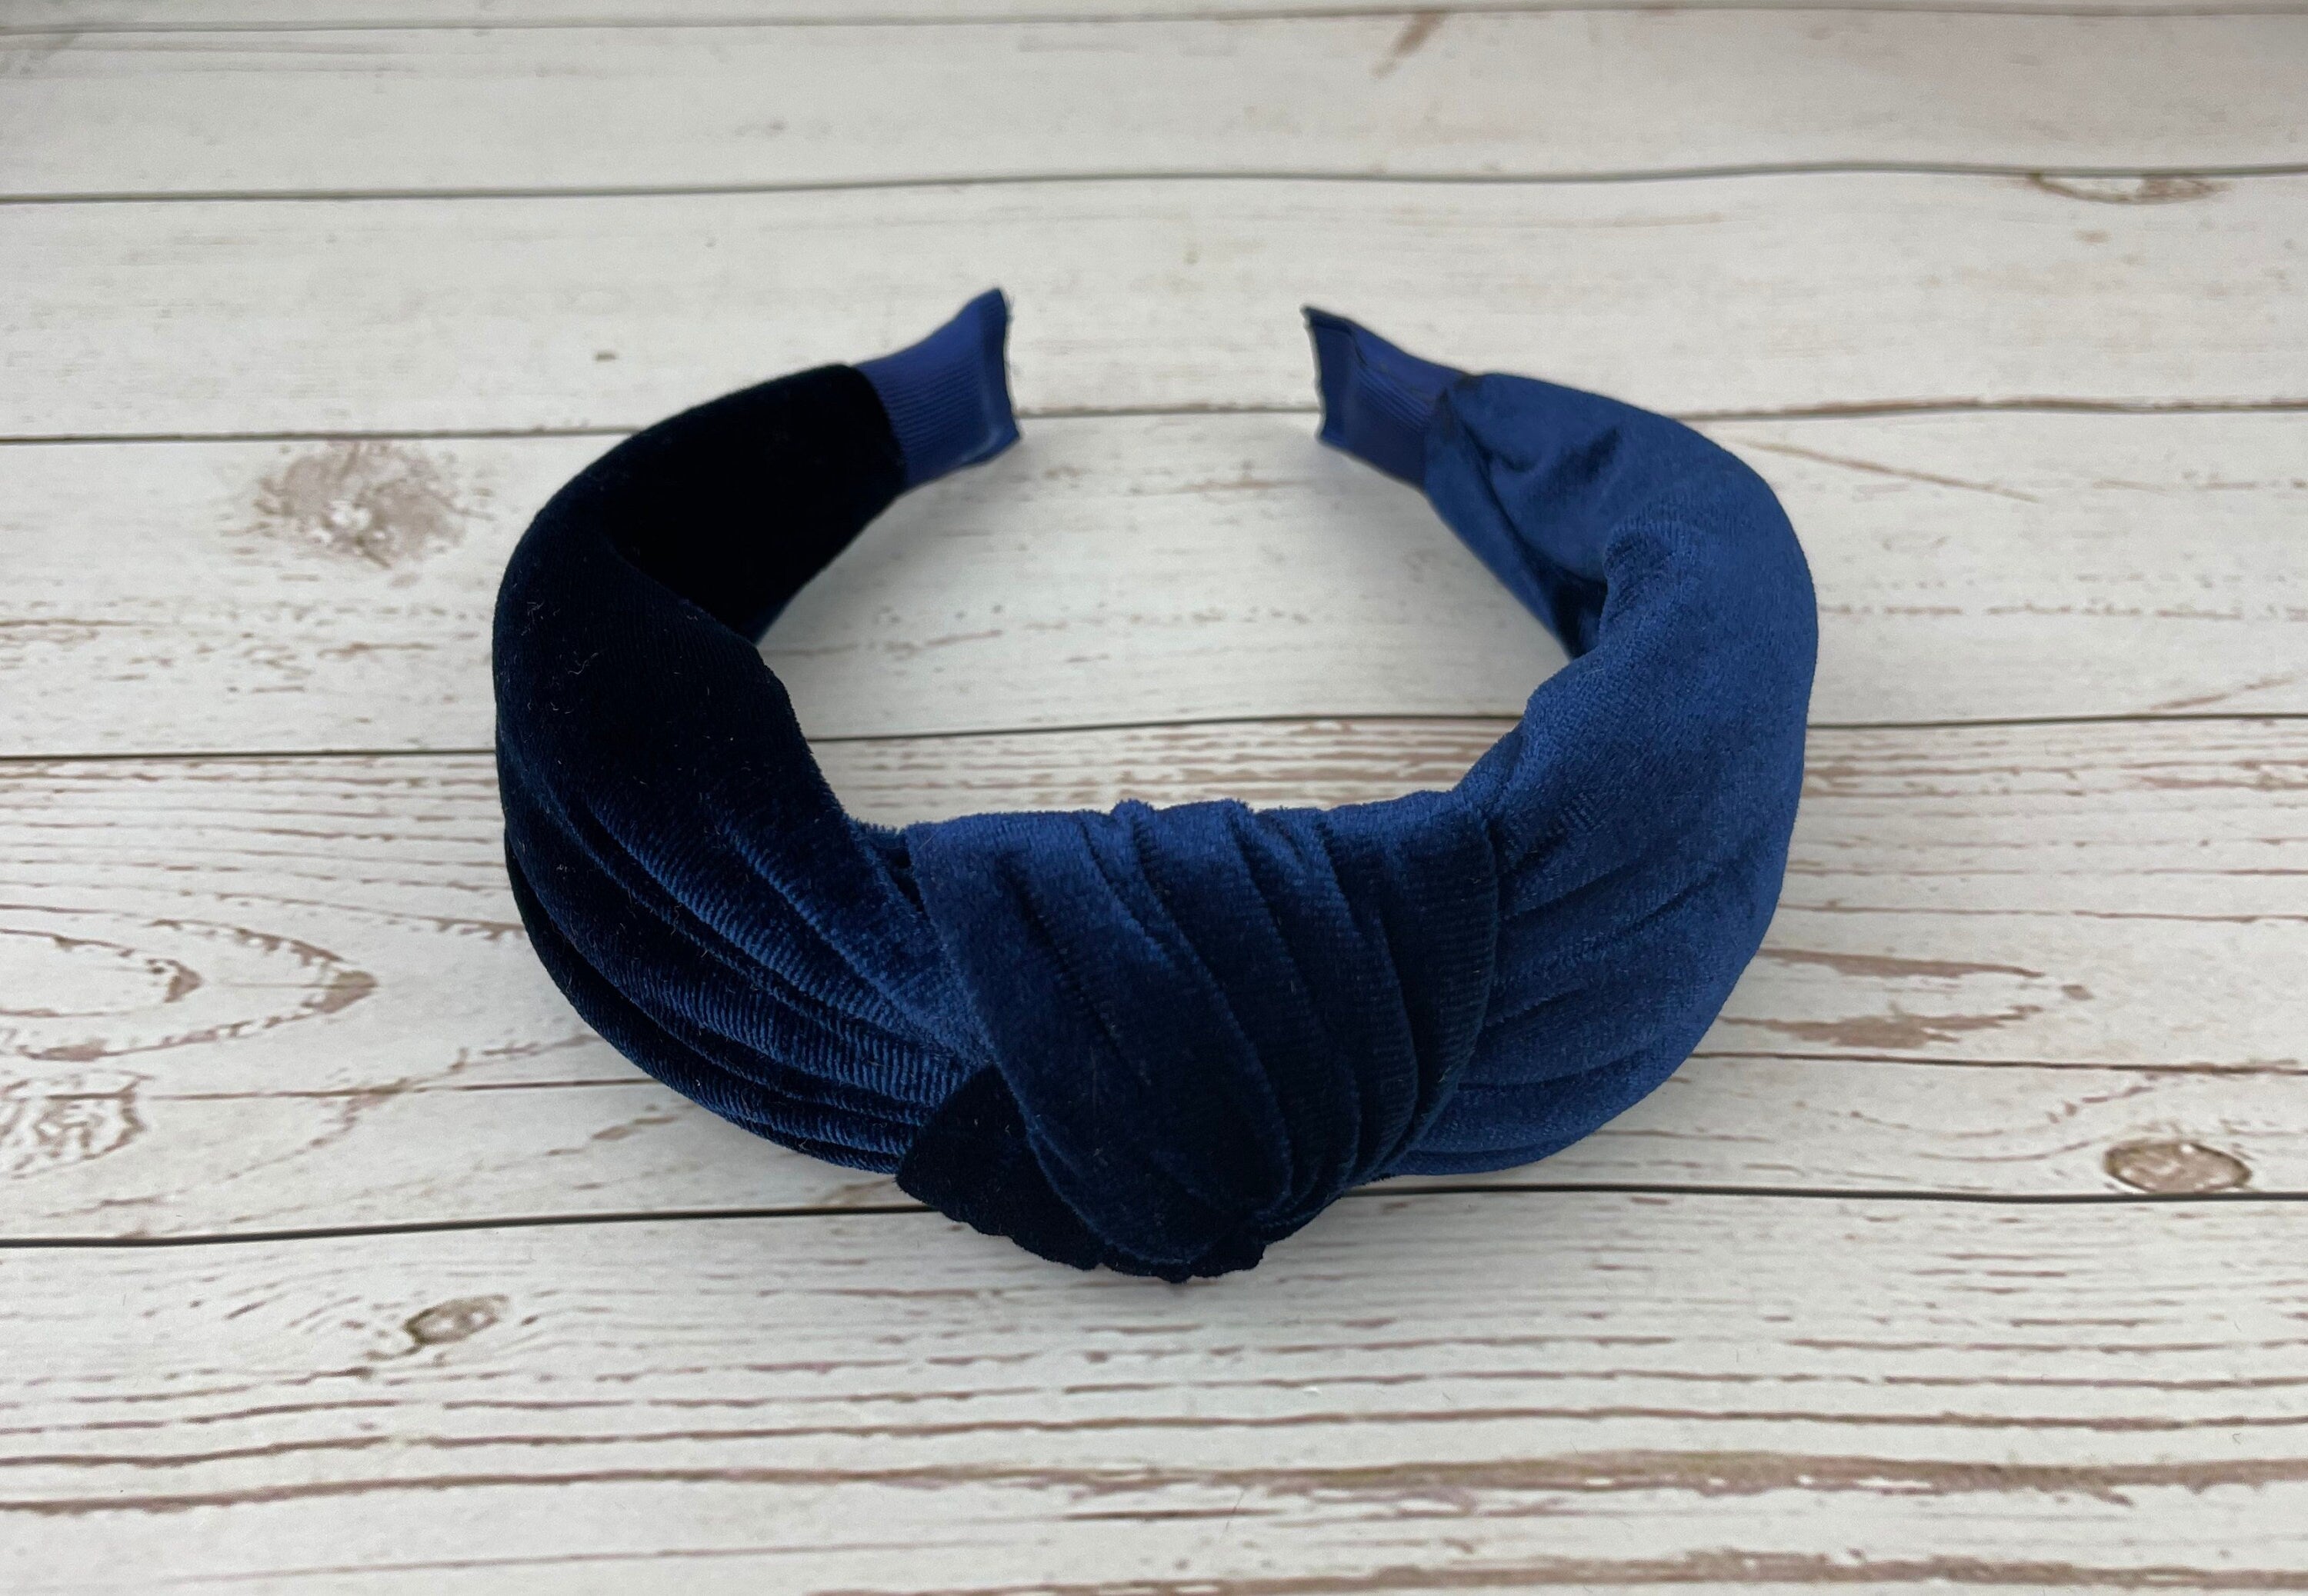 Elevate your hairstyle with this chic Parliament Blue Knotted Velvet Headband - a must-have accessory for any fashion-forward woman!